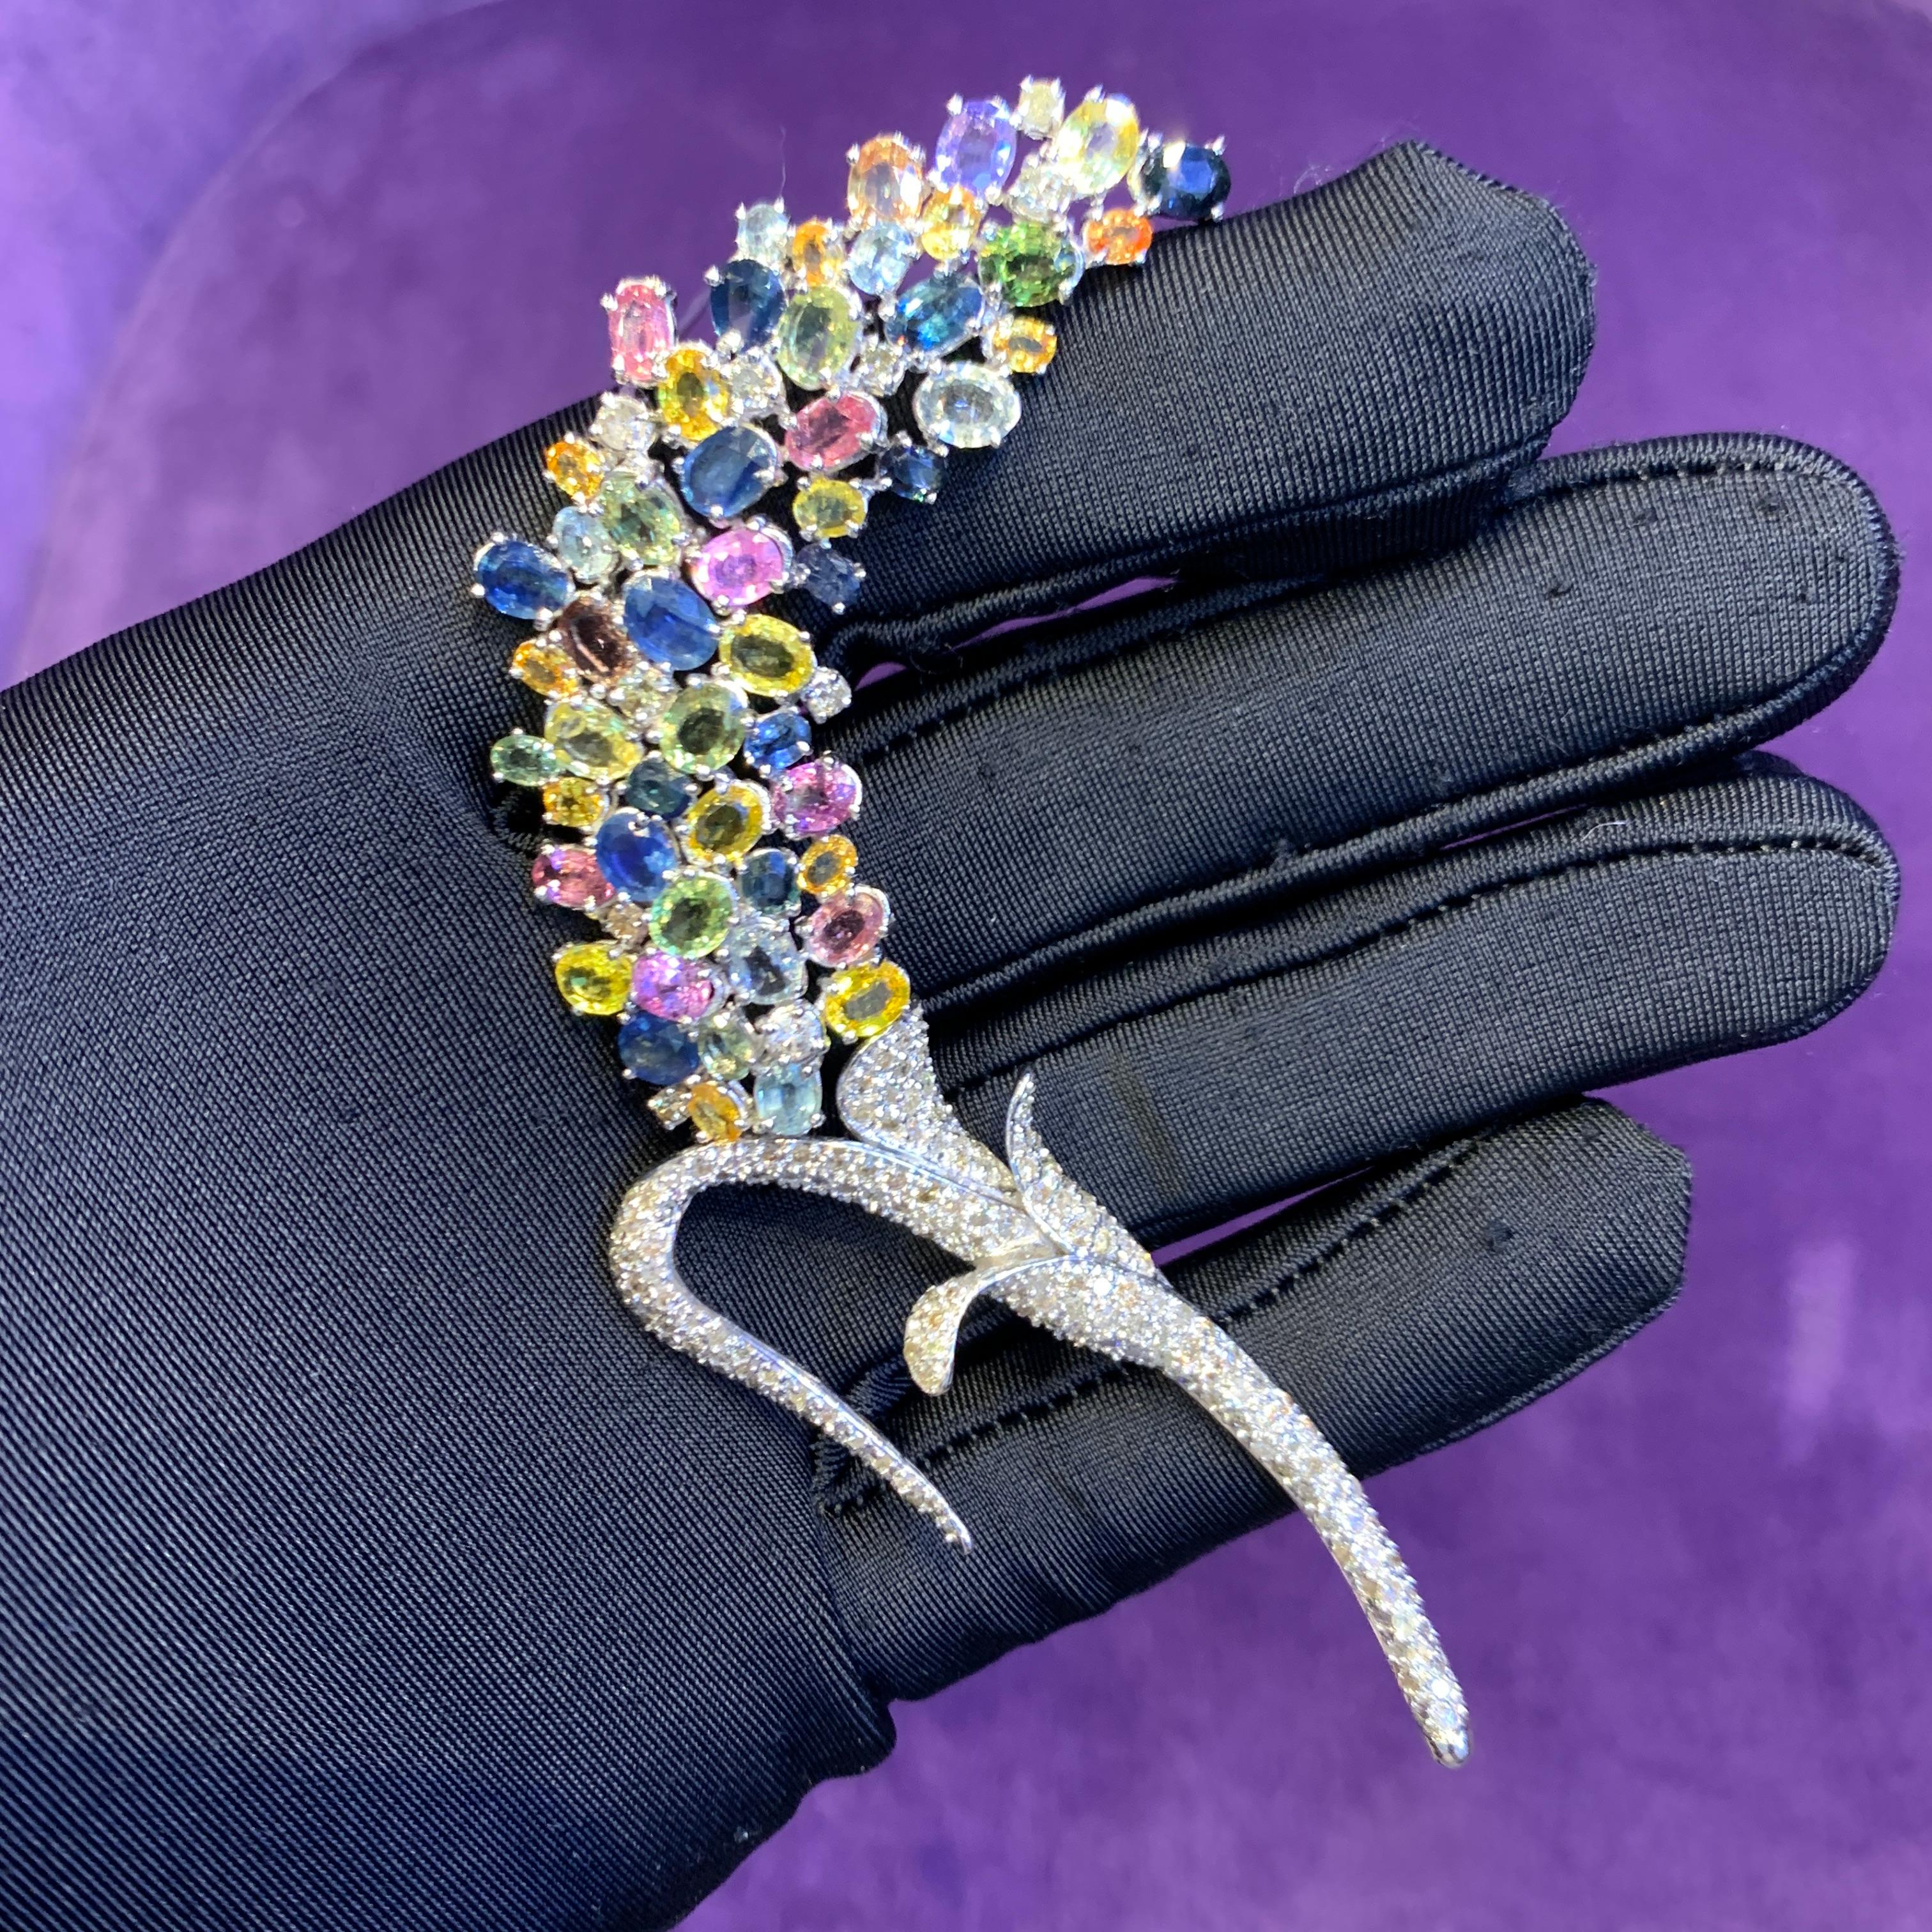 Multi Colored Sapphire Flower Brooch

An 18 karat white gold brooch with a floral motif set with oval shaped sapphires of various colors 

Measurements: 4